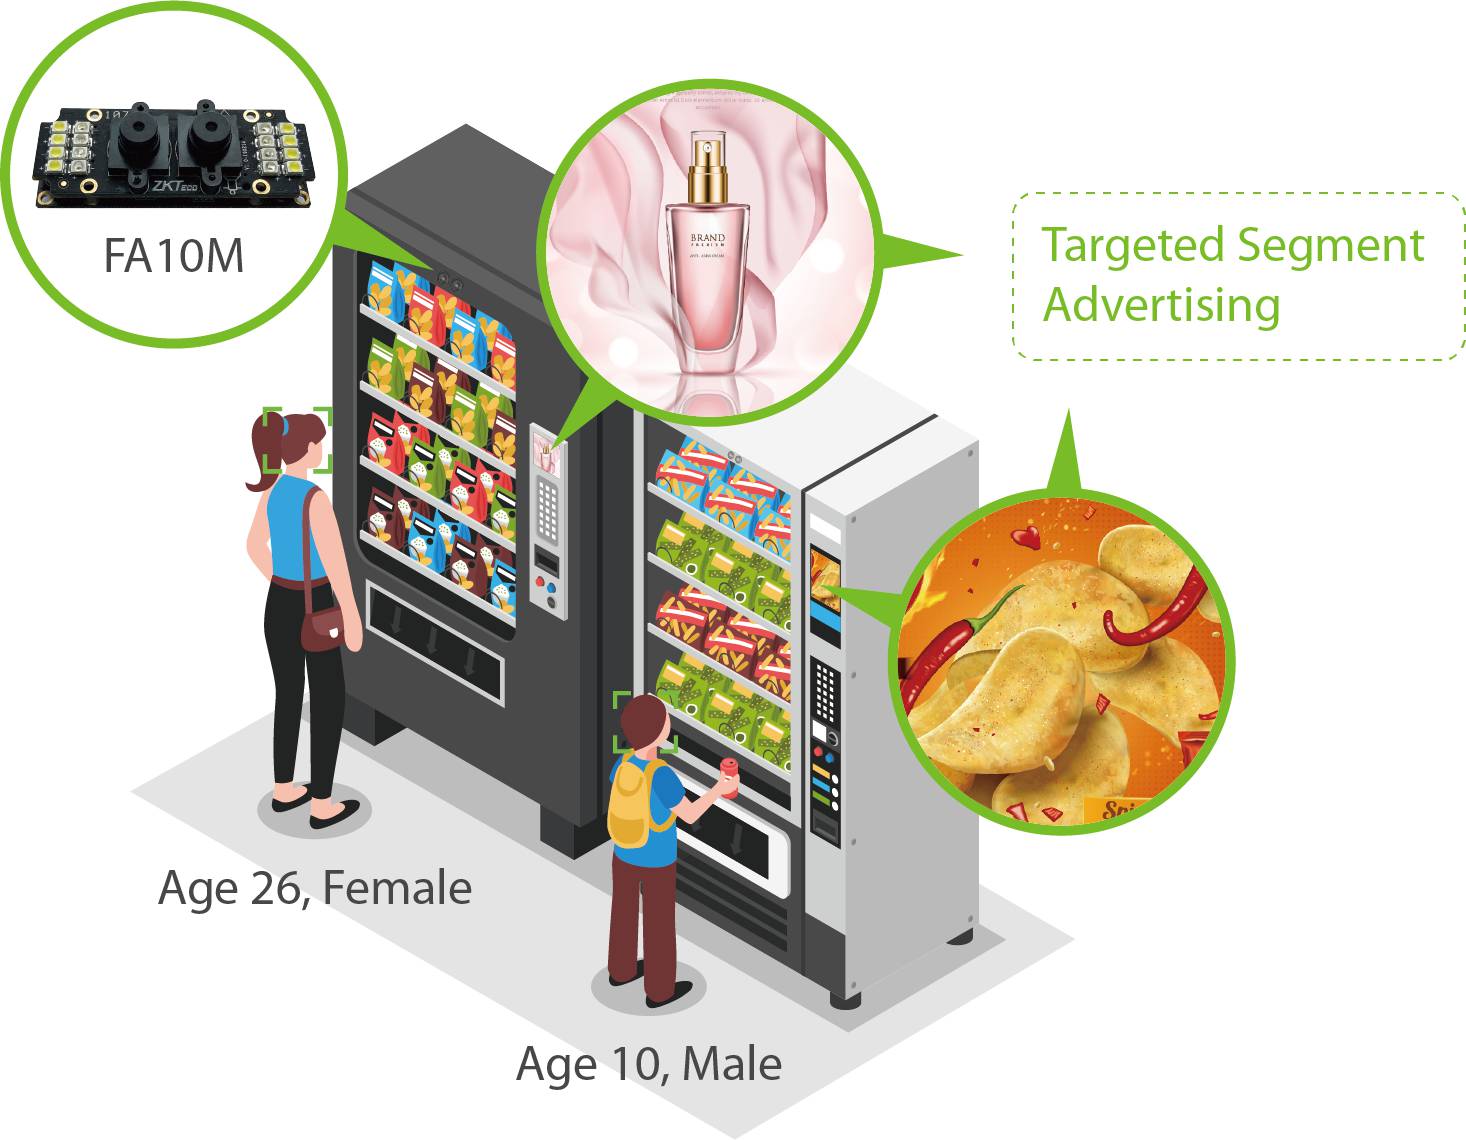 ZKTeco’s Facial Recognition with Vending Machine in Japan